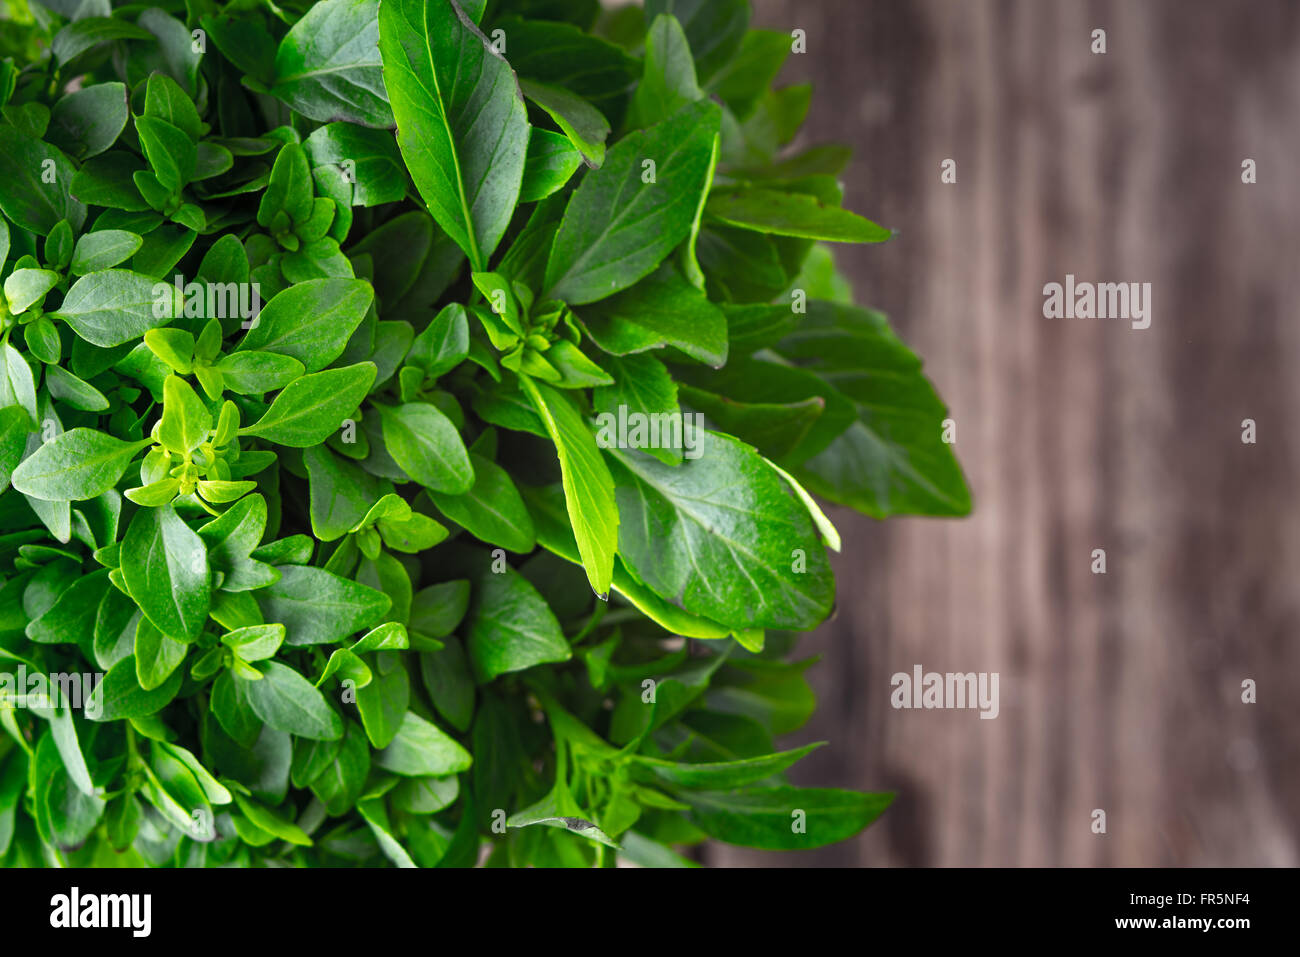 Basil leaves on a wooden background blurred horizontal Stock Photo